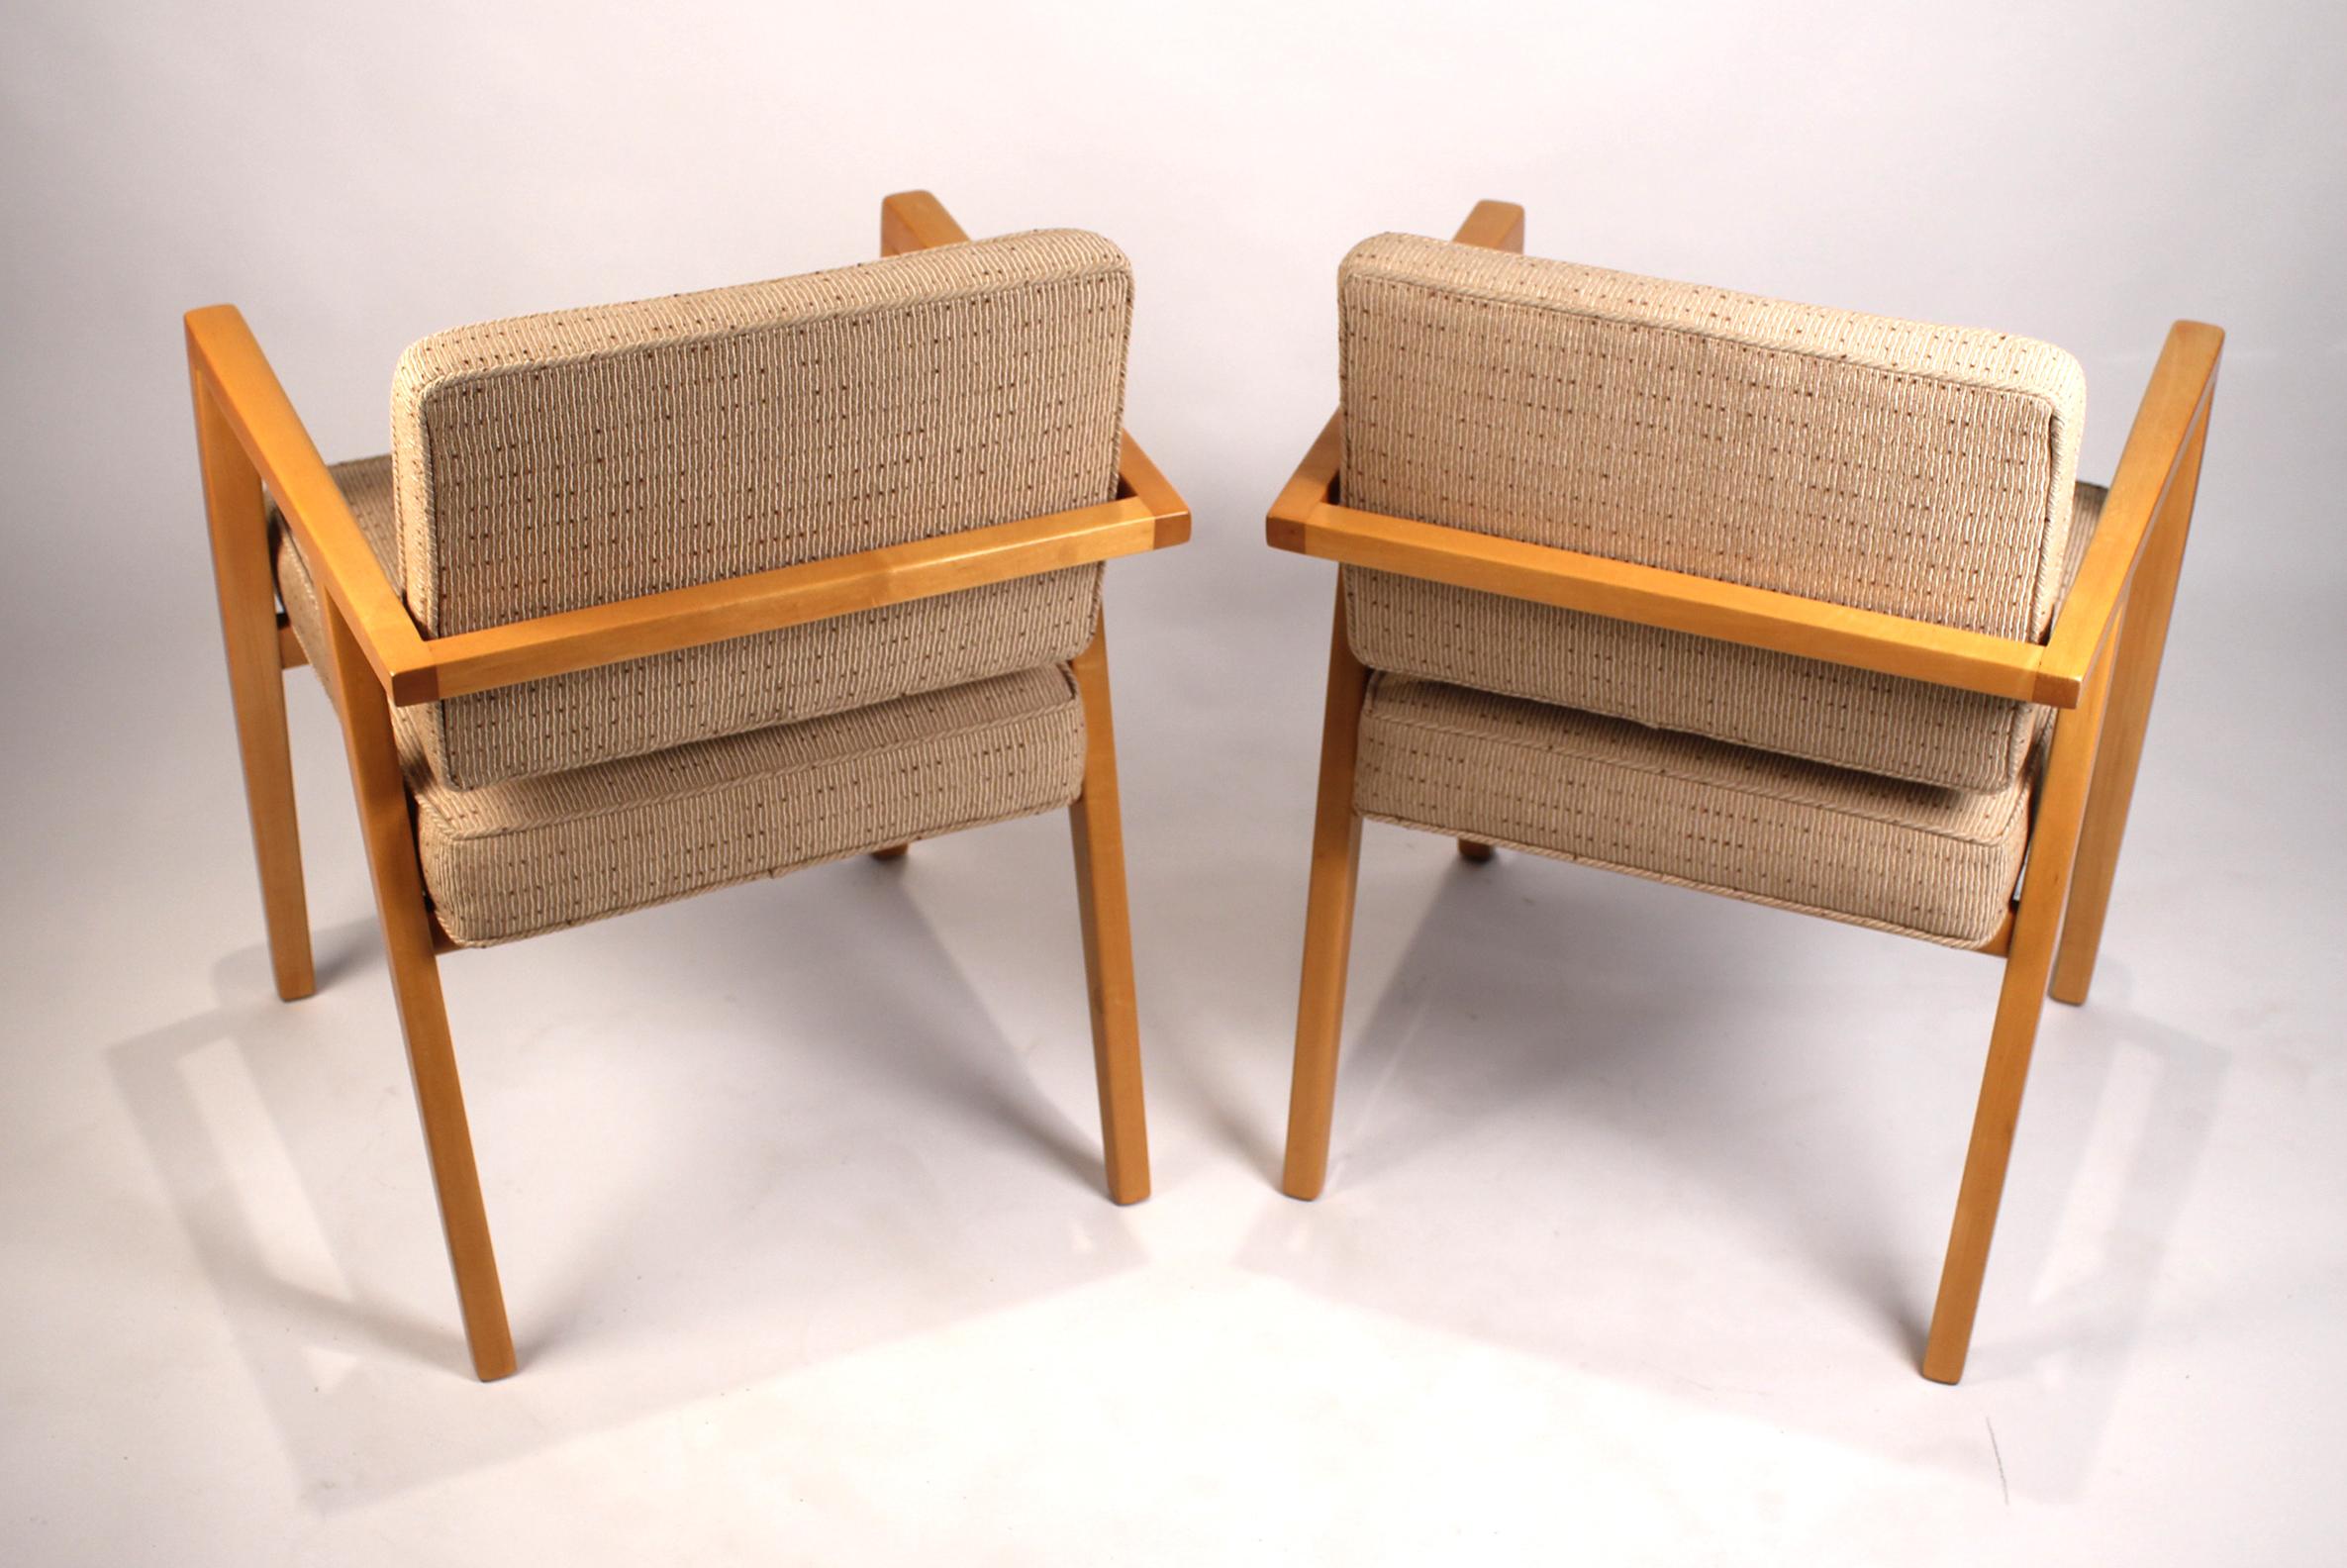 20th Century Set of Ten Fully Restored Vintage Franco Albini Dining Chairs produced by Knoll